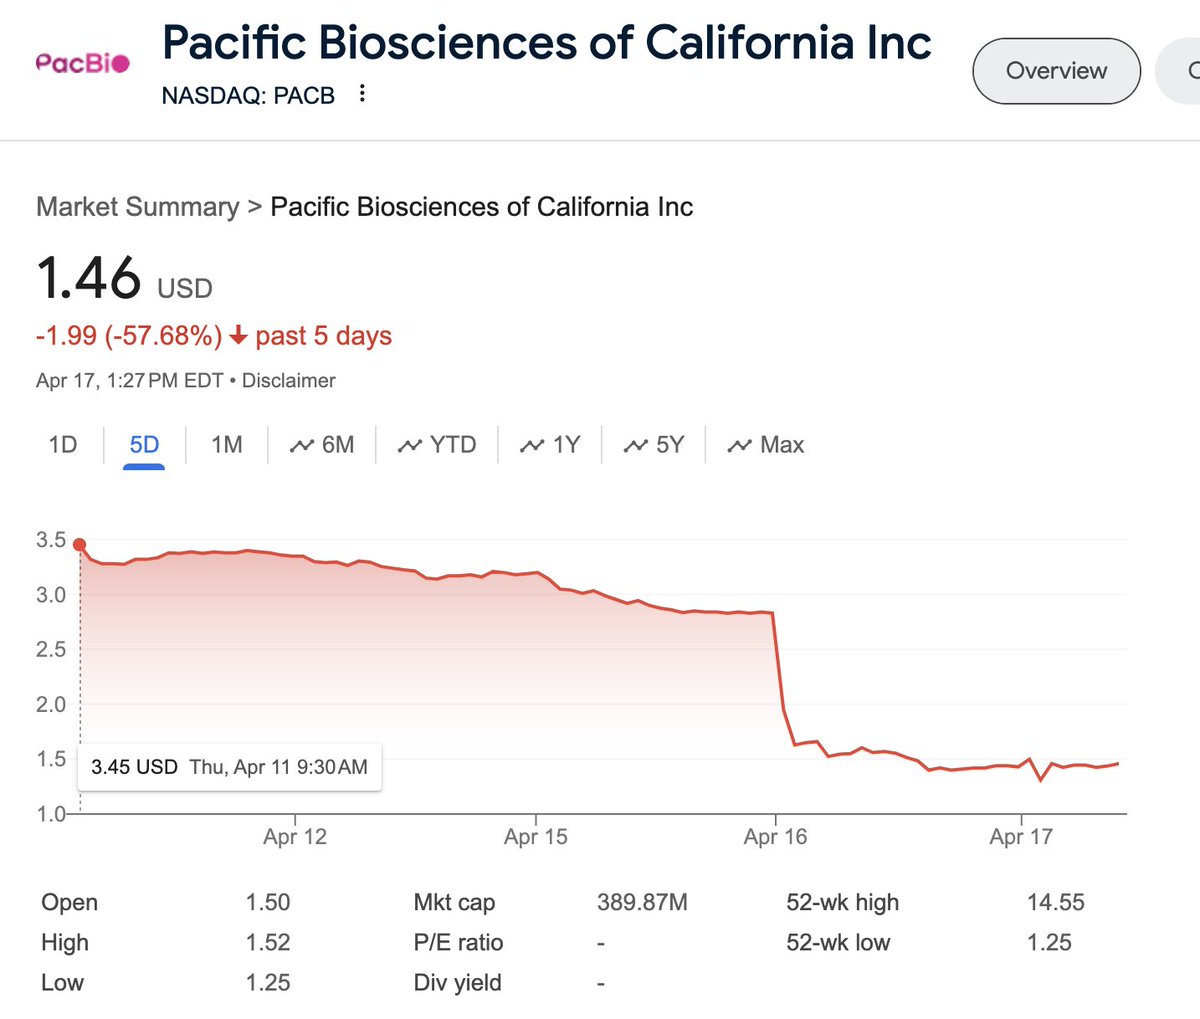 The real question everyone should be asking about Pacbio's $PACB stock market plunge is whether they will have an #ASHG24 party this year🤔